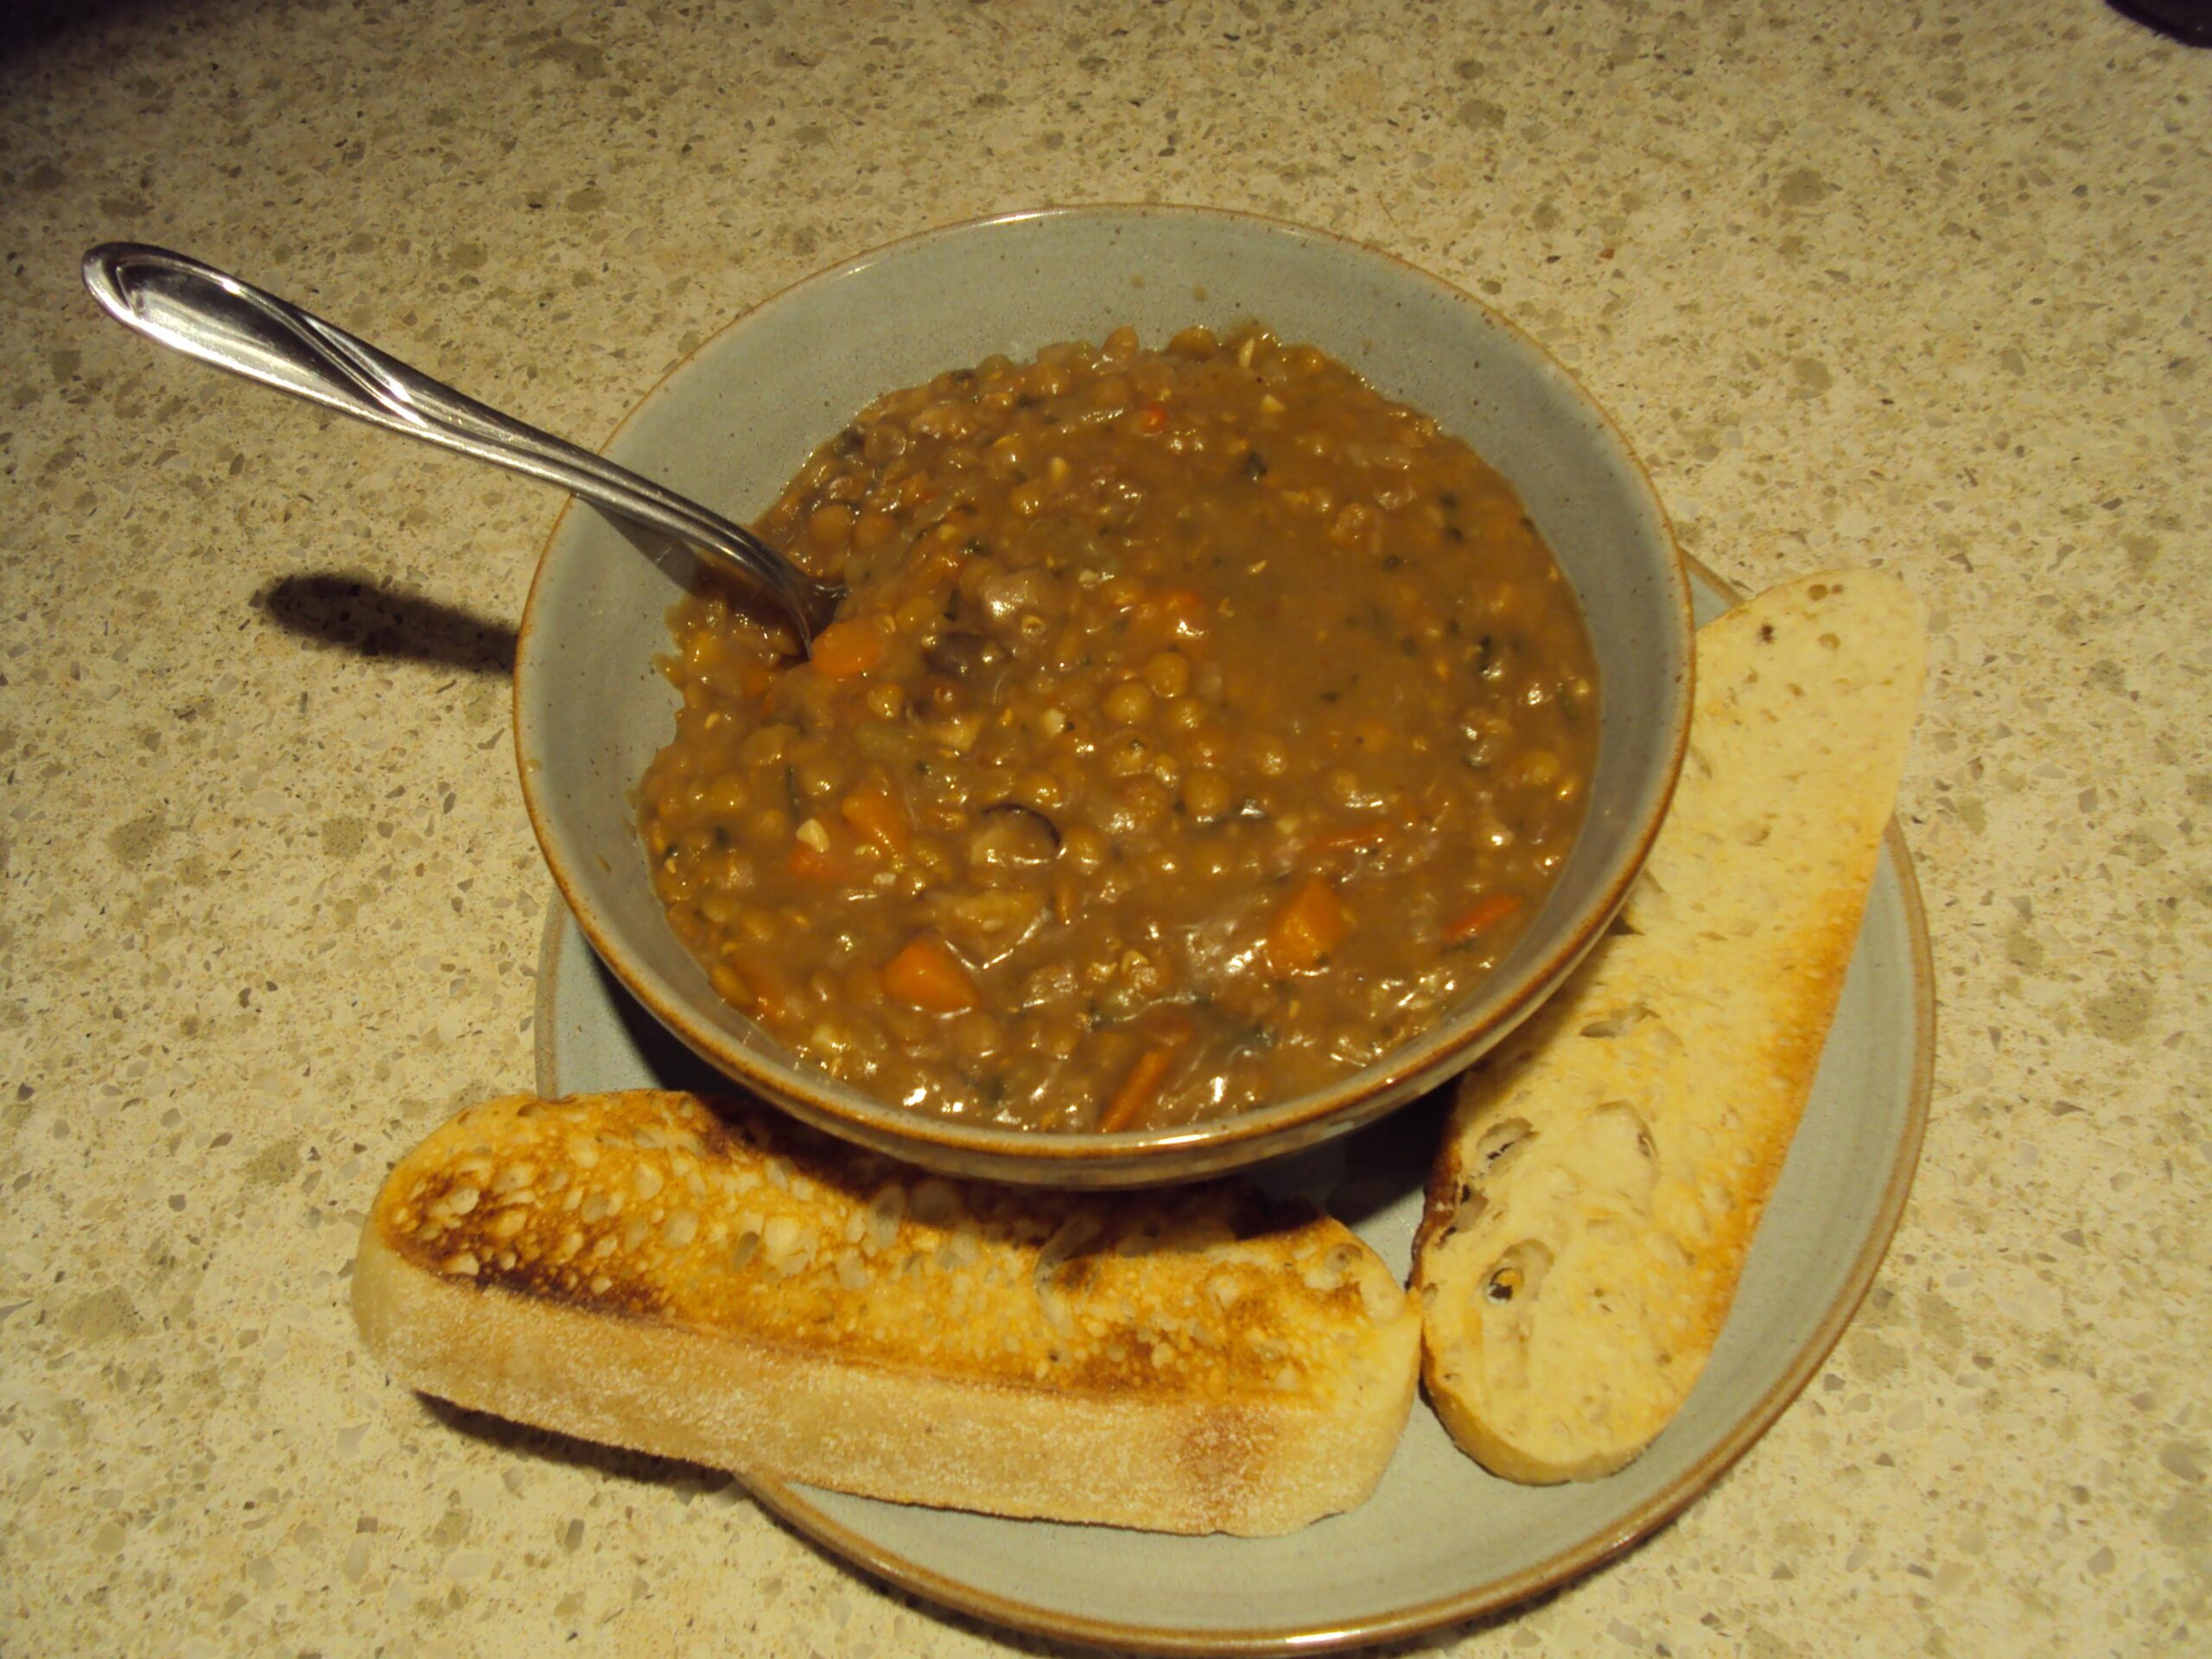  Picture a steaming bowl of lentil-mushroom soup, perfect for a cool autumn day.